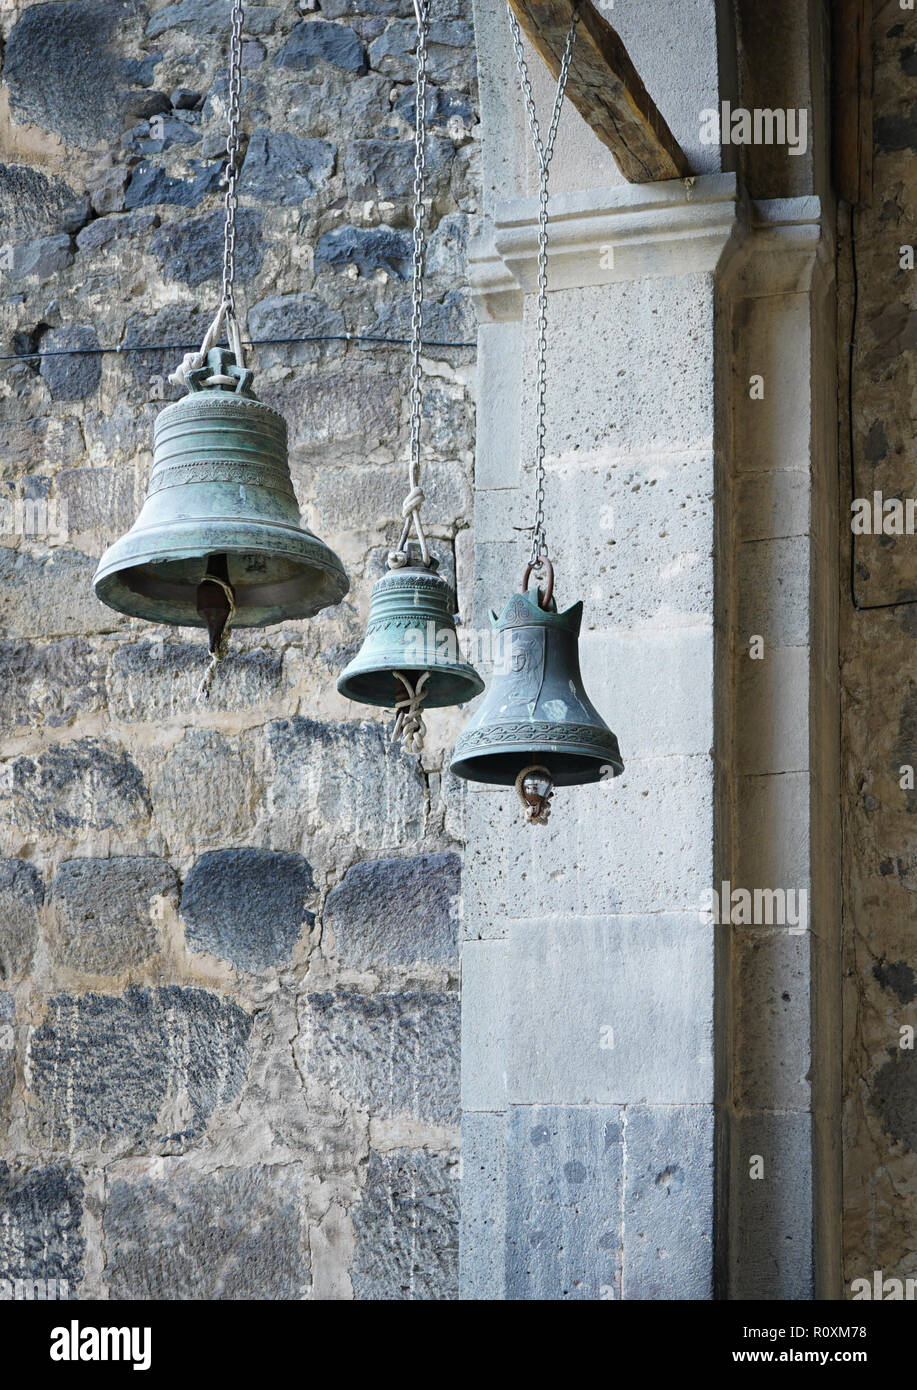 three church bells of small, medium and large size hanging in chains Stock Photo